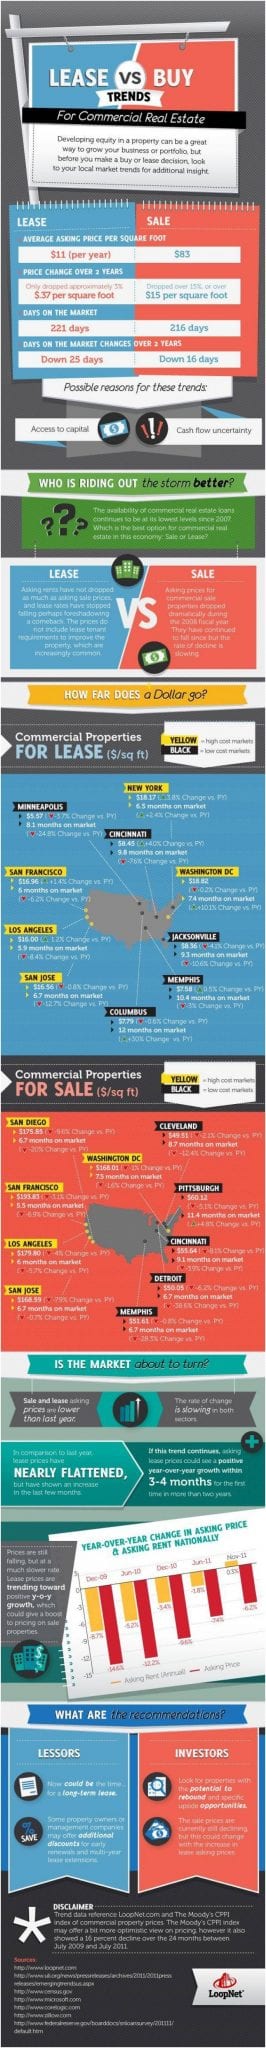 lease-vs-buy-commercial-real-estate